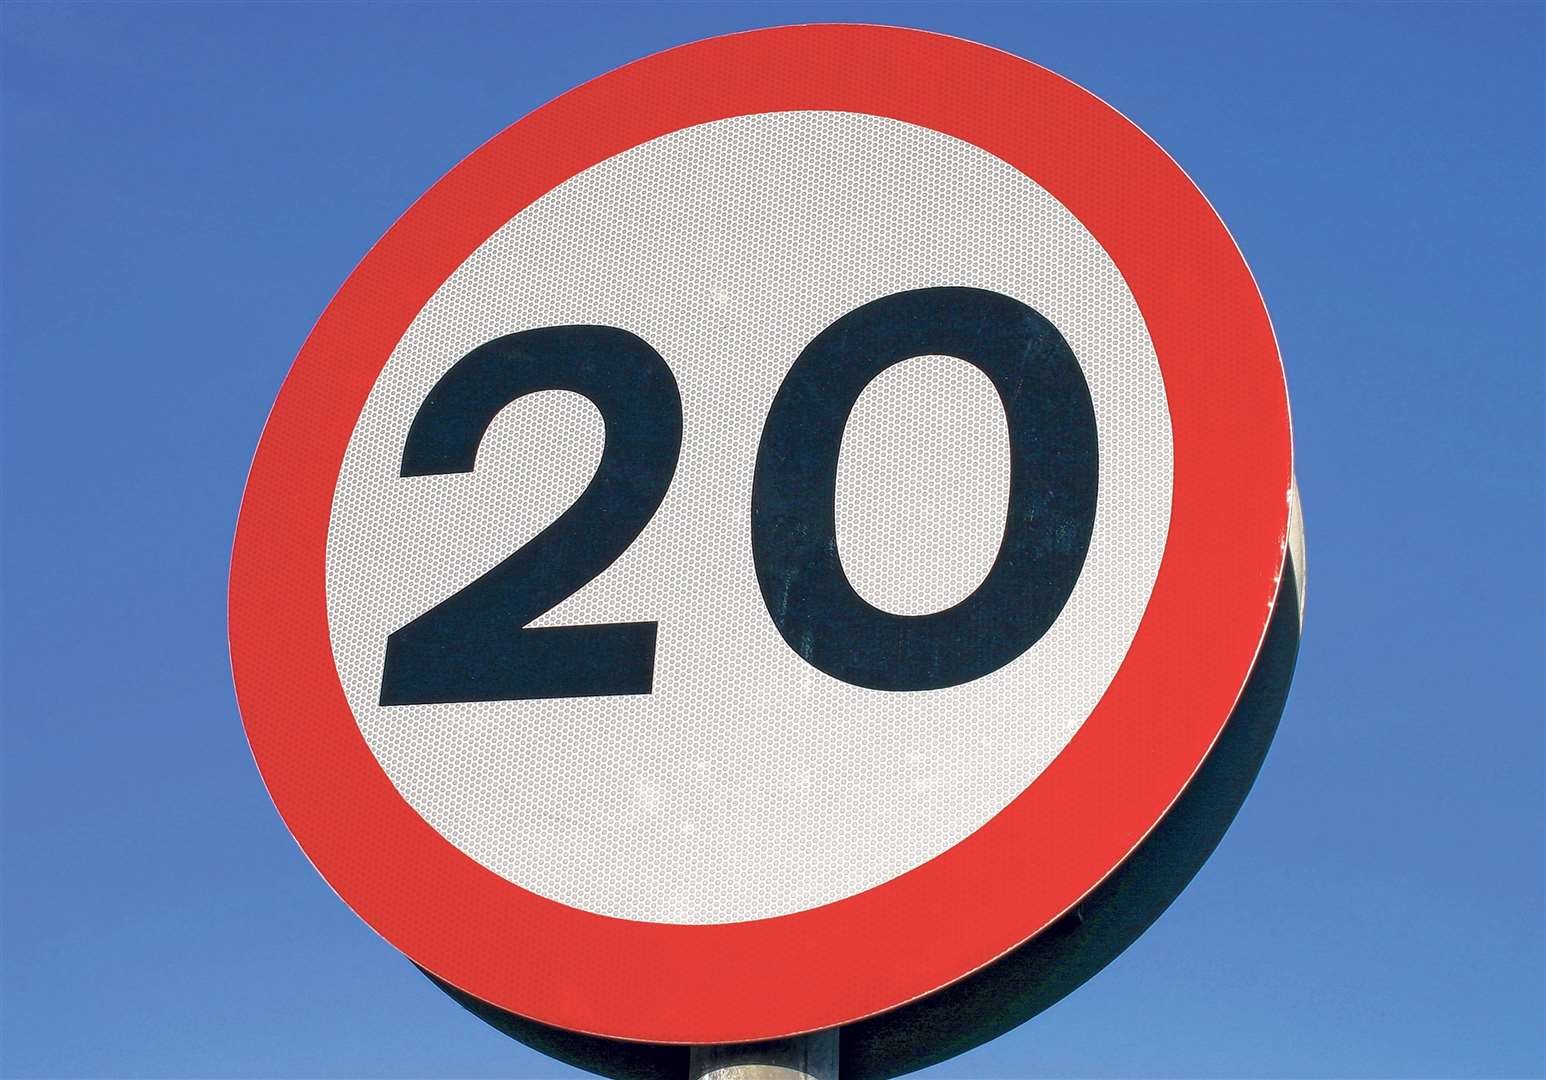 There are clear benefits of reducing speed limits – but opposition too